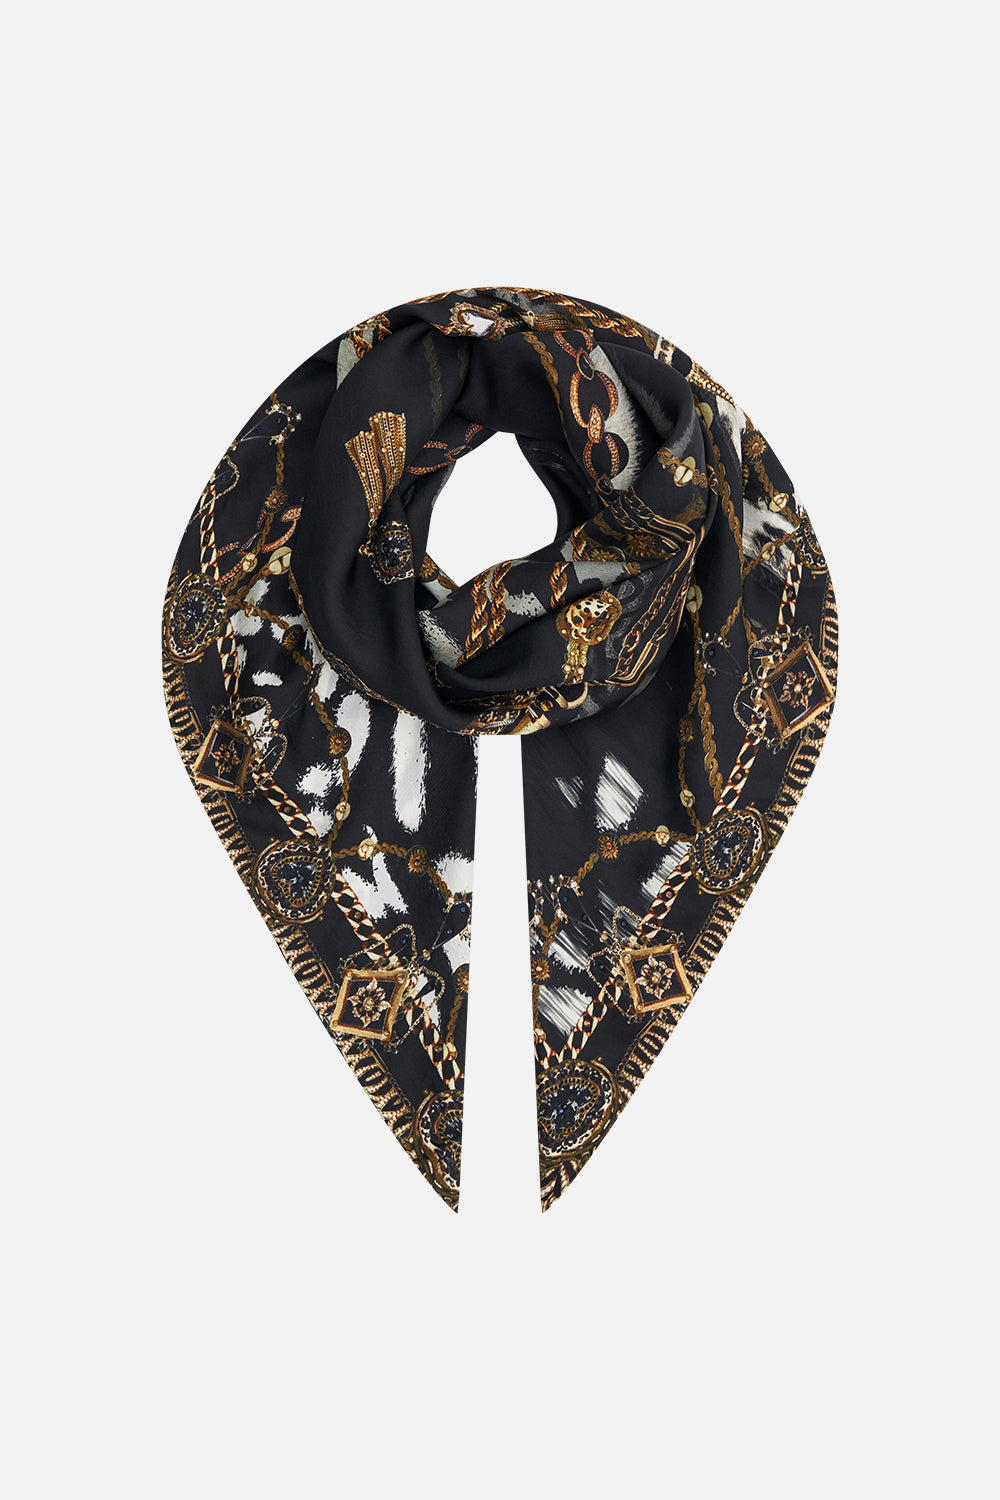 Product view of CAMILLA animal print silk square scarf in Untamed Royalty print